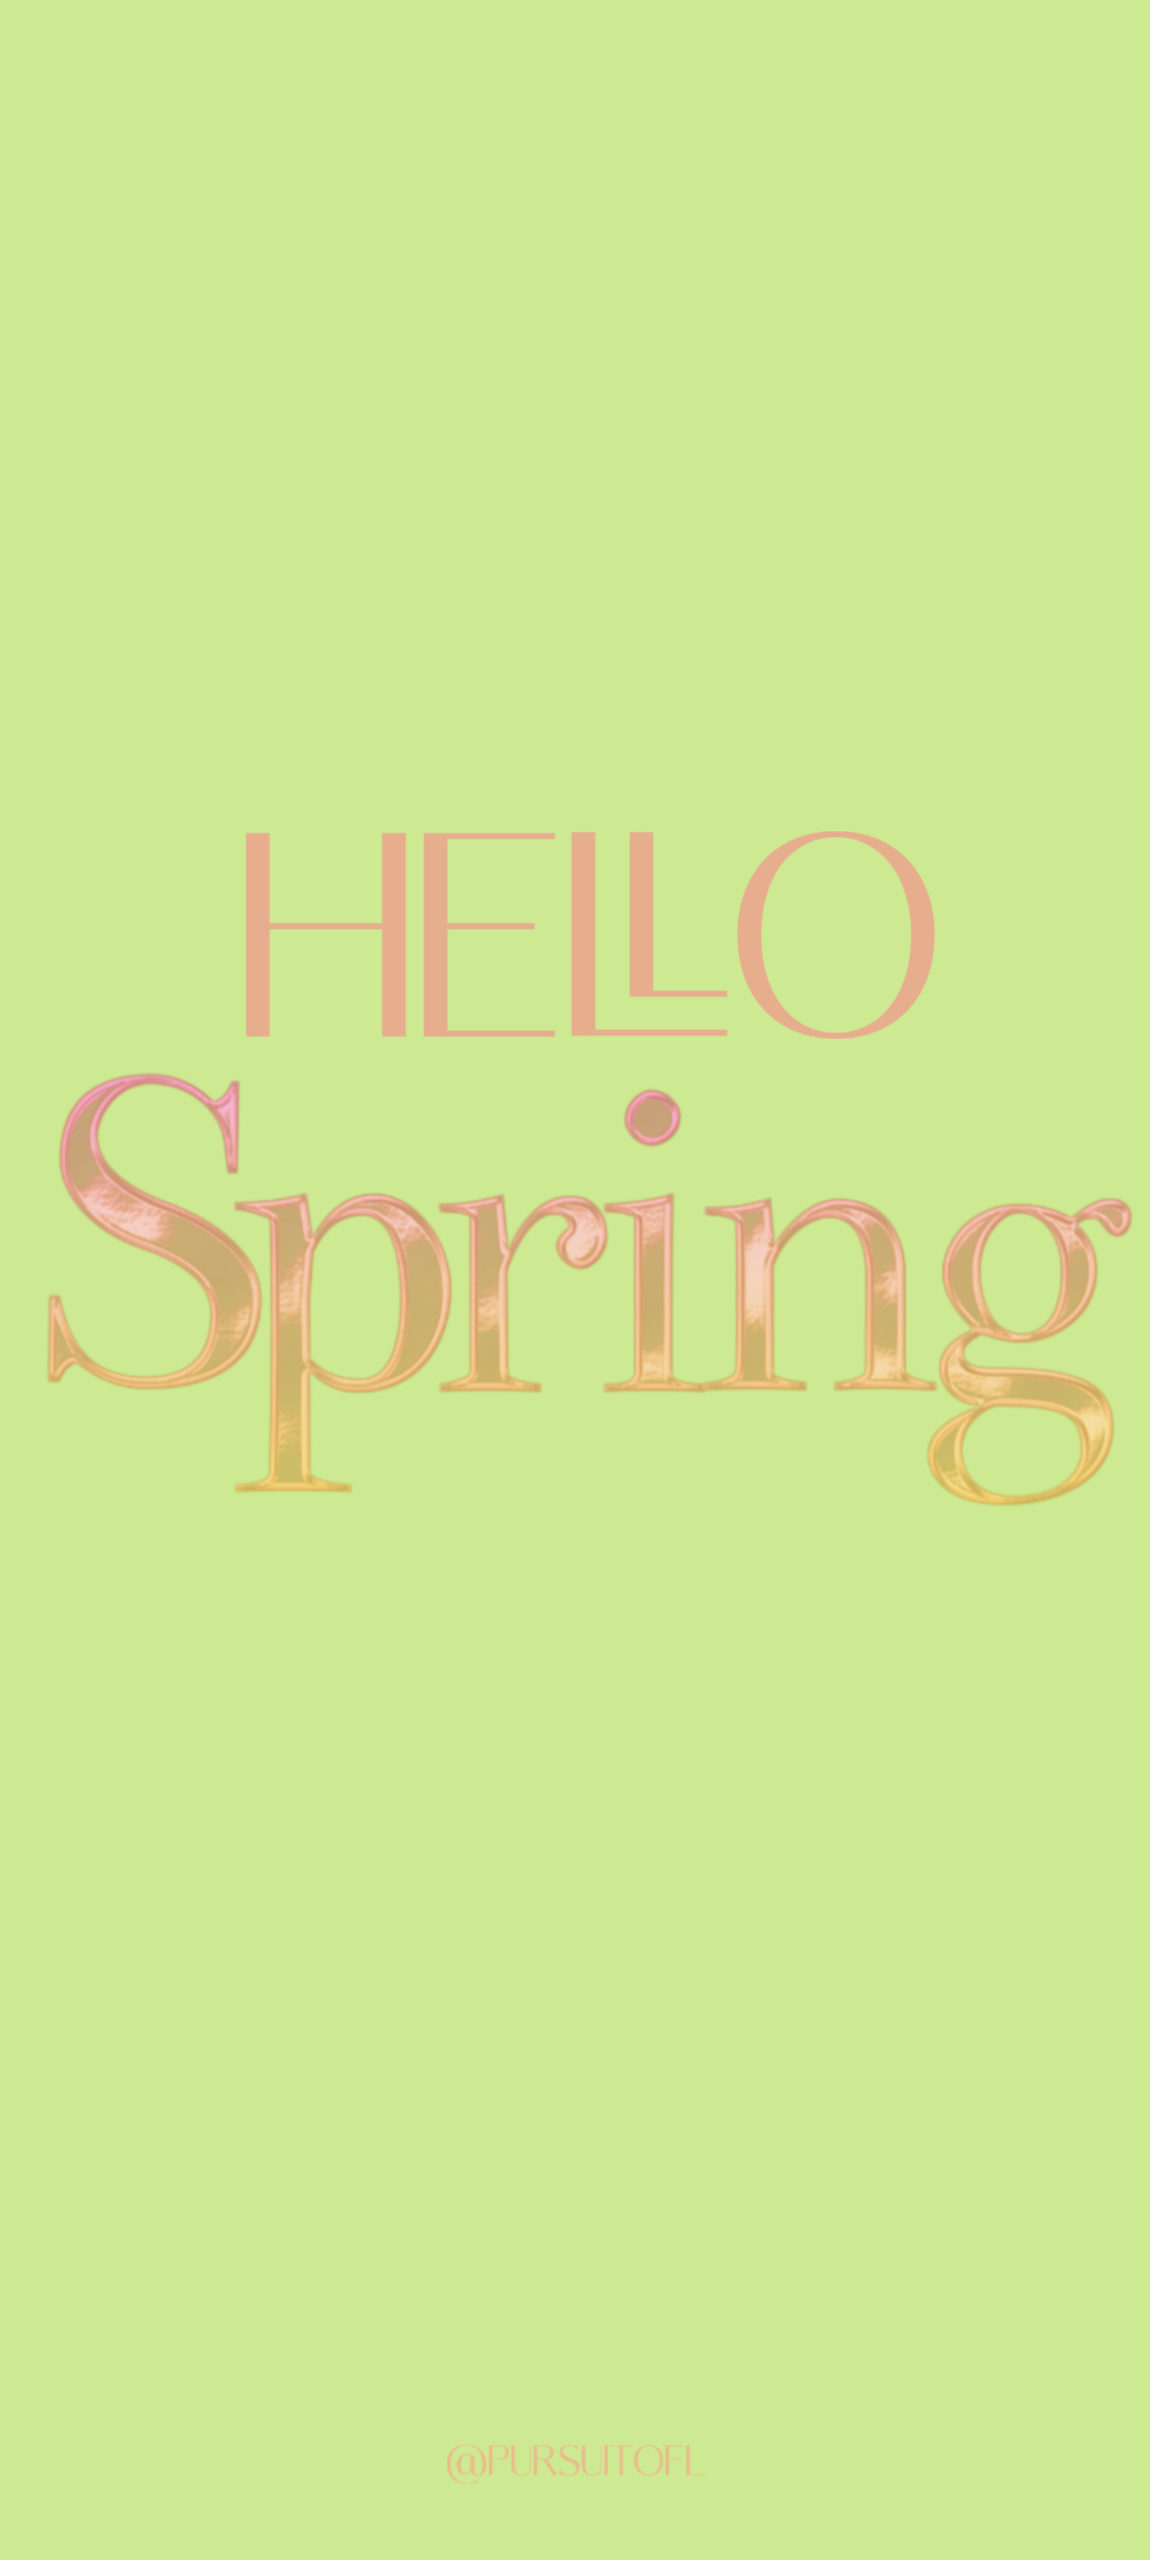 Green Phone wallpaper with Hello Spring text